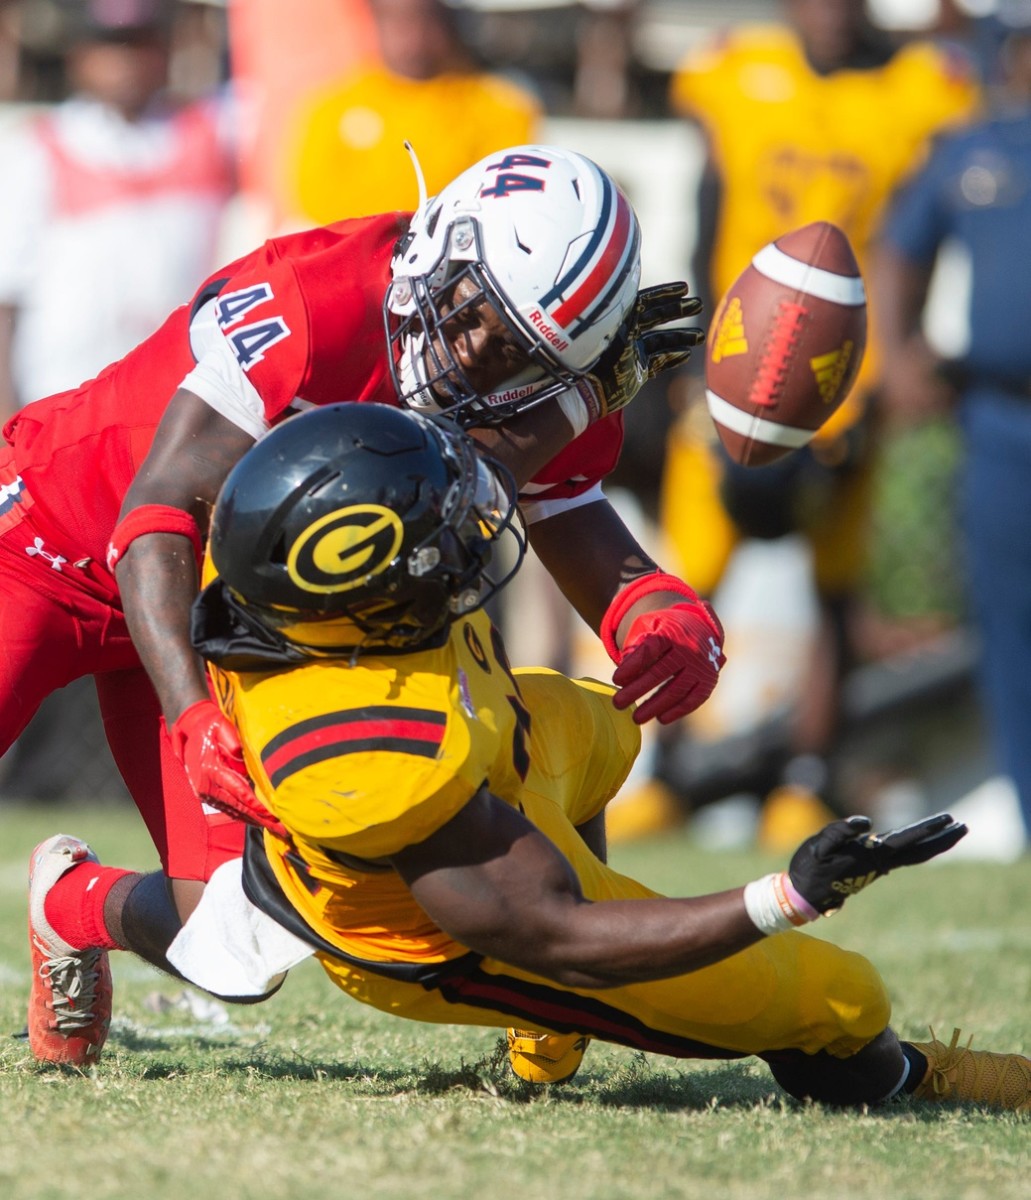 Jackson State linebacker Daelyn Dunn (44) causes Grambling running back Keilon Elder (23) to fumble during the second half of an NCAA college football game in Jackson, Miss., Saturday, Sept. 17, 2022. Jackson State won 66-24. Tcl Grambling Jackson State